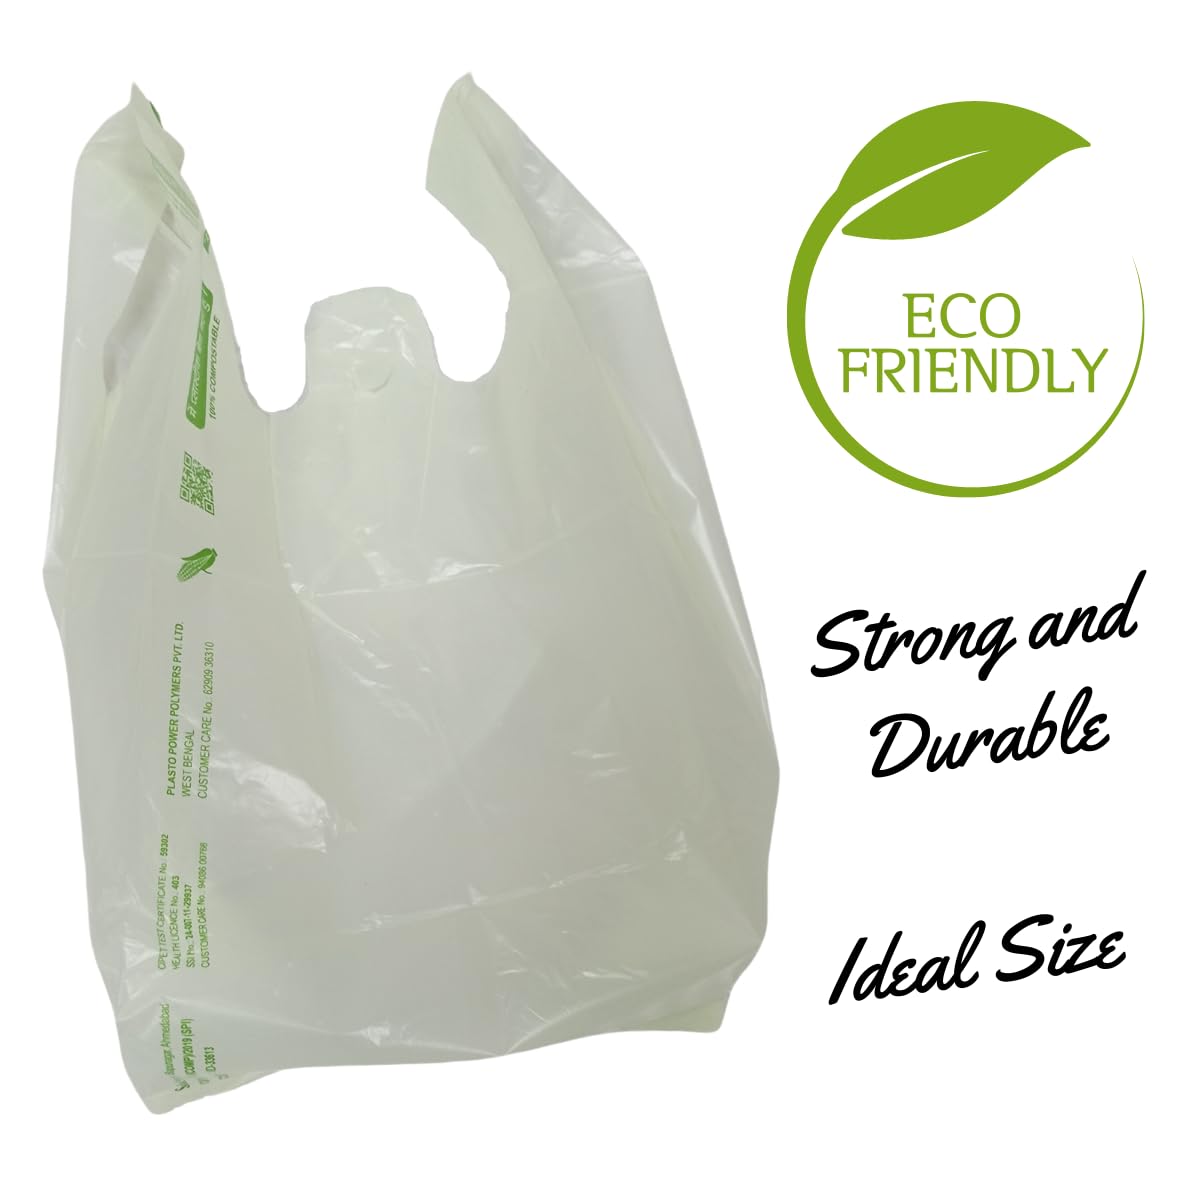 SINGHAL Biodegradable Carry Bags | Certified Compostable Carry Bag for Home, Grocery Store Bag - Pack of 100 Bags 16x20 Inches